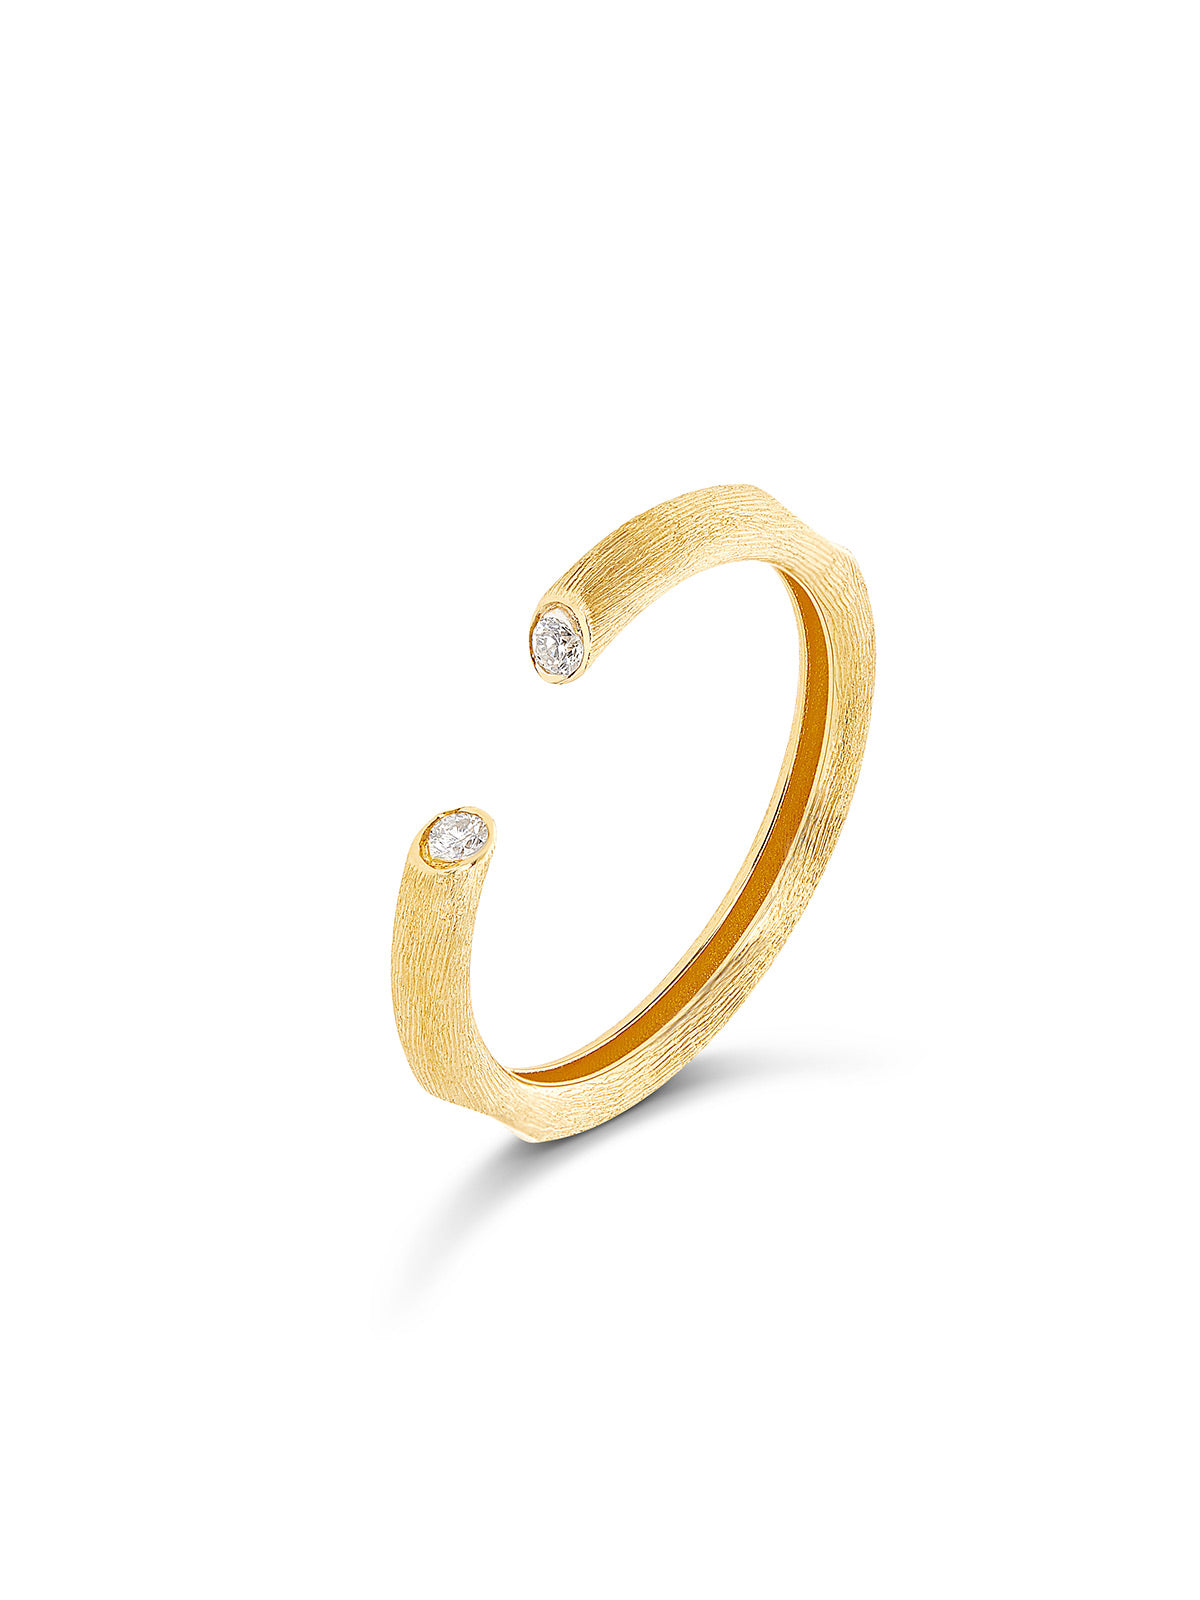 "Libera" Gold ring with diamond accents